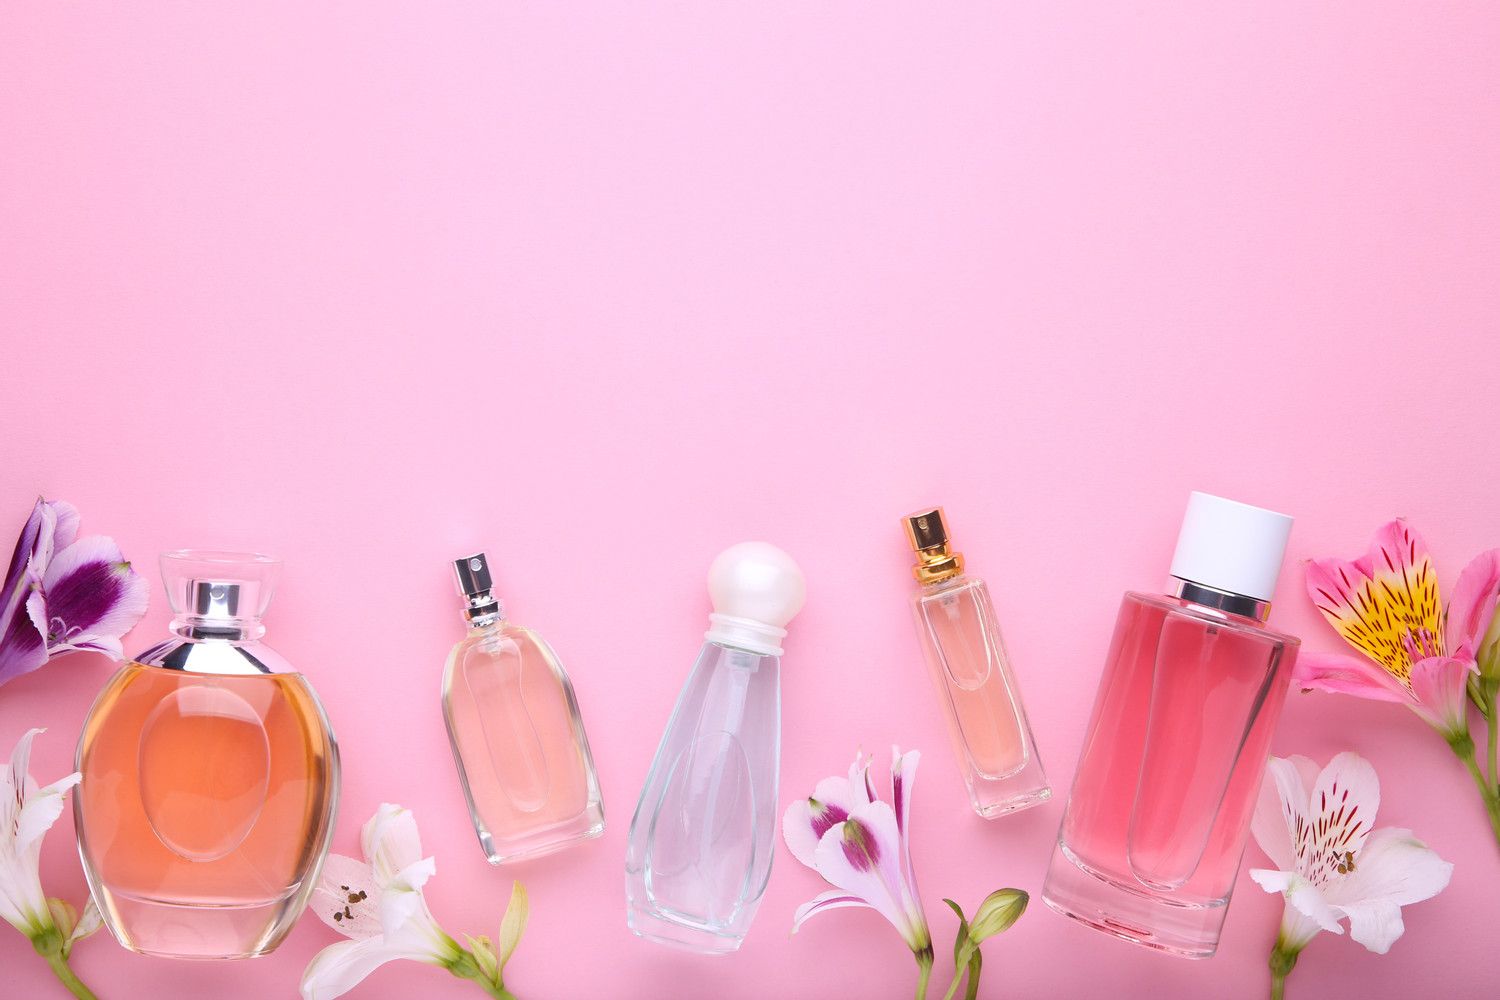 Where do you find the most reliable natural fragrance suppliers in B2B markets?